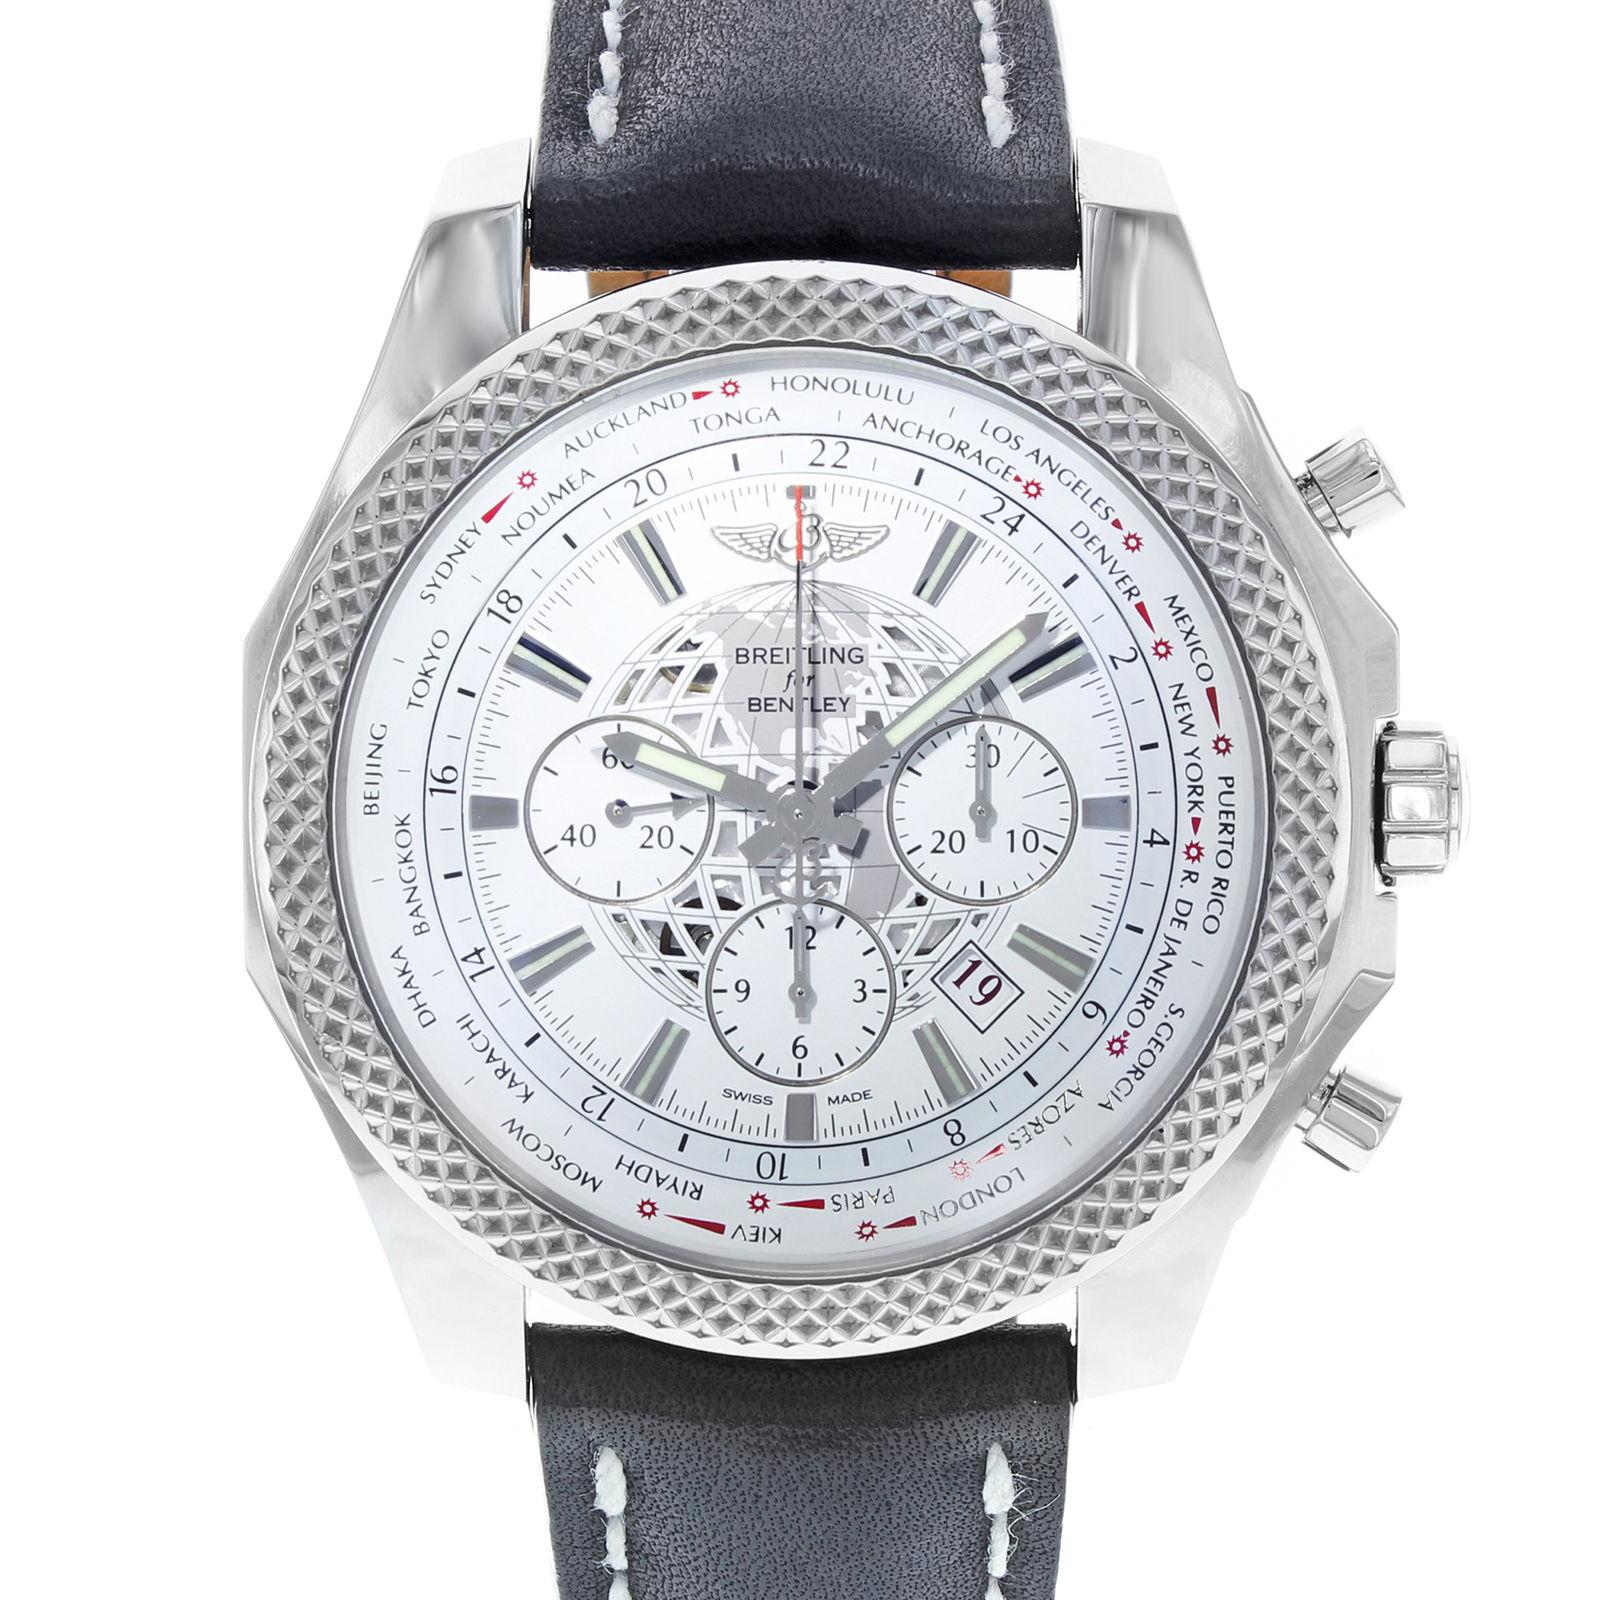 20726
This display model Breitling Bentley AB0521U0/A755-441X is a beautiful men's timepiece that is powered by an automatic movement which is cased in a stainless steel case. It has a round shape face, chronograph, date, dual time, multiple time